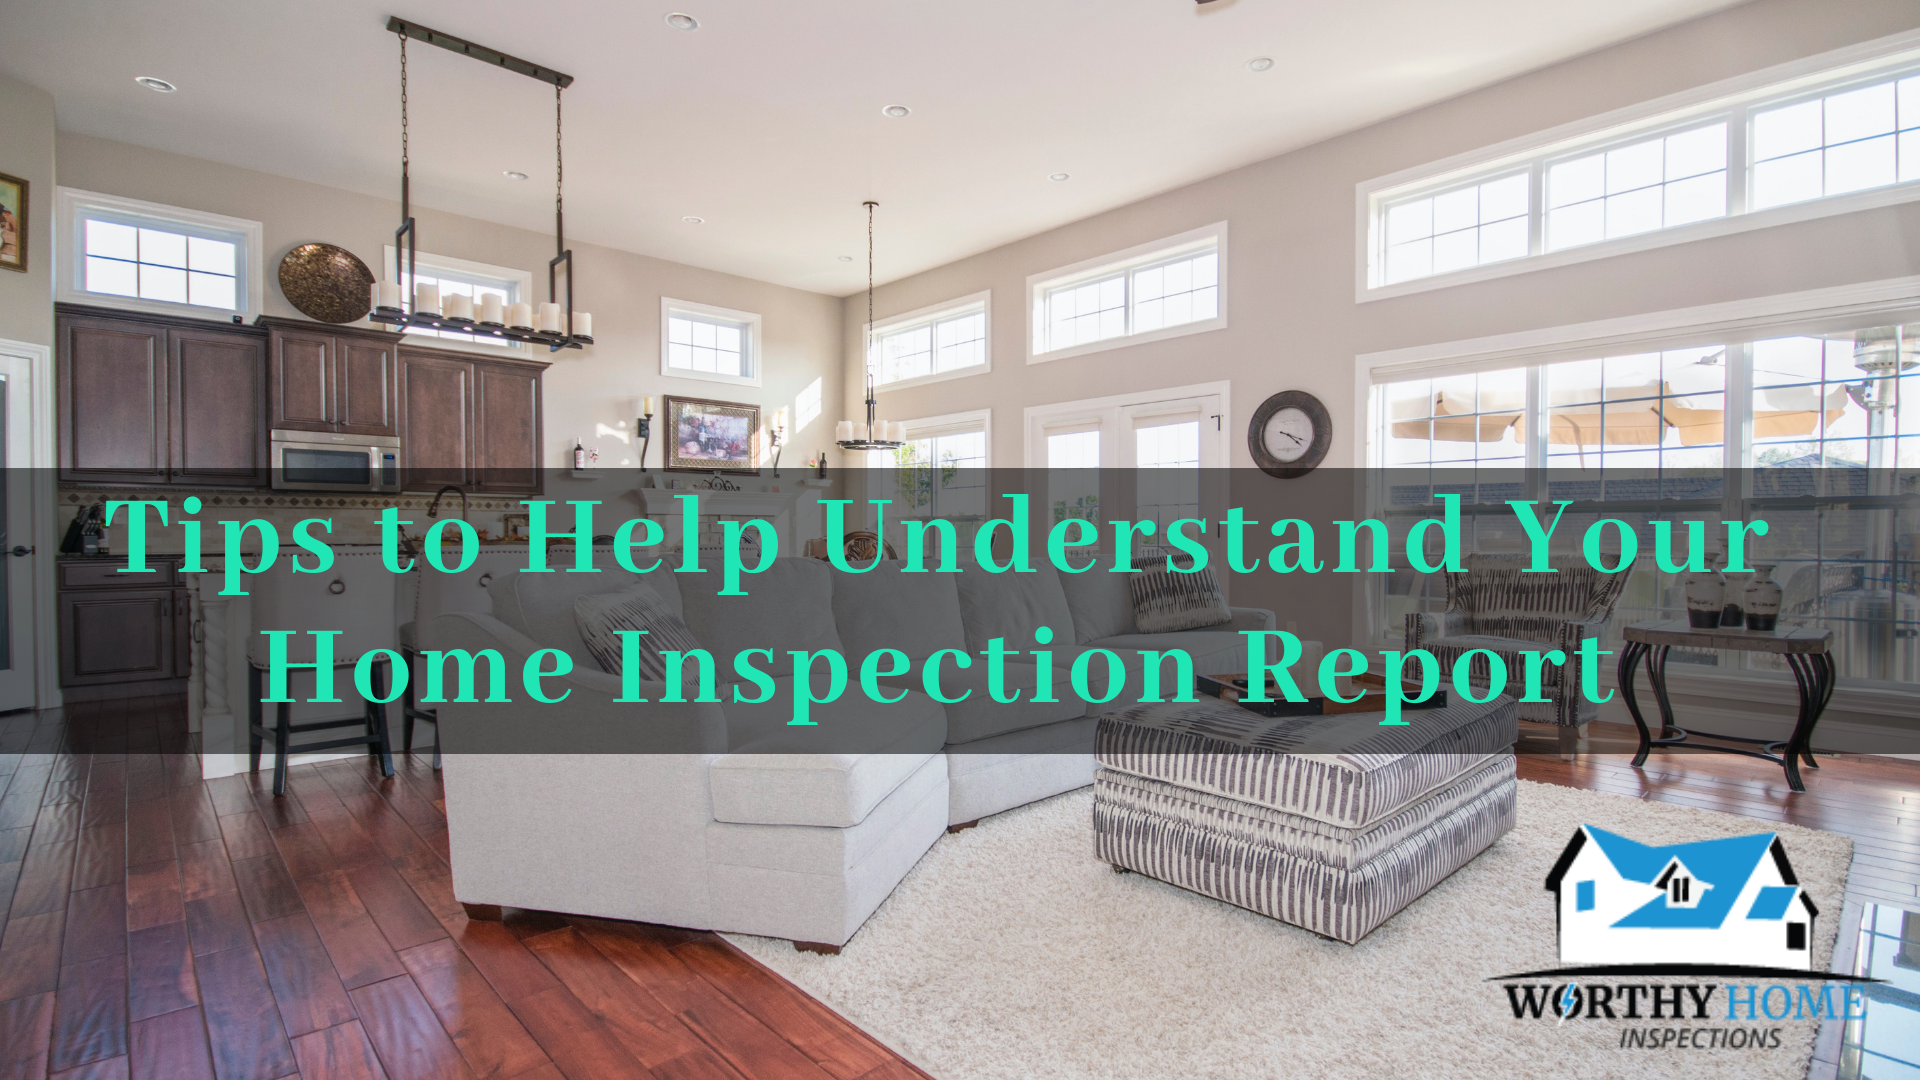 Tips to Help Understand Your Home Inspection Report